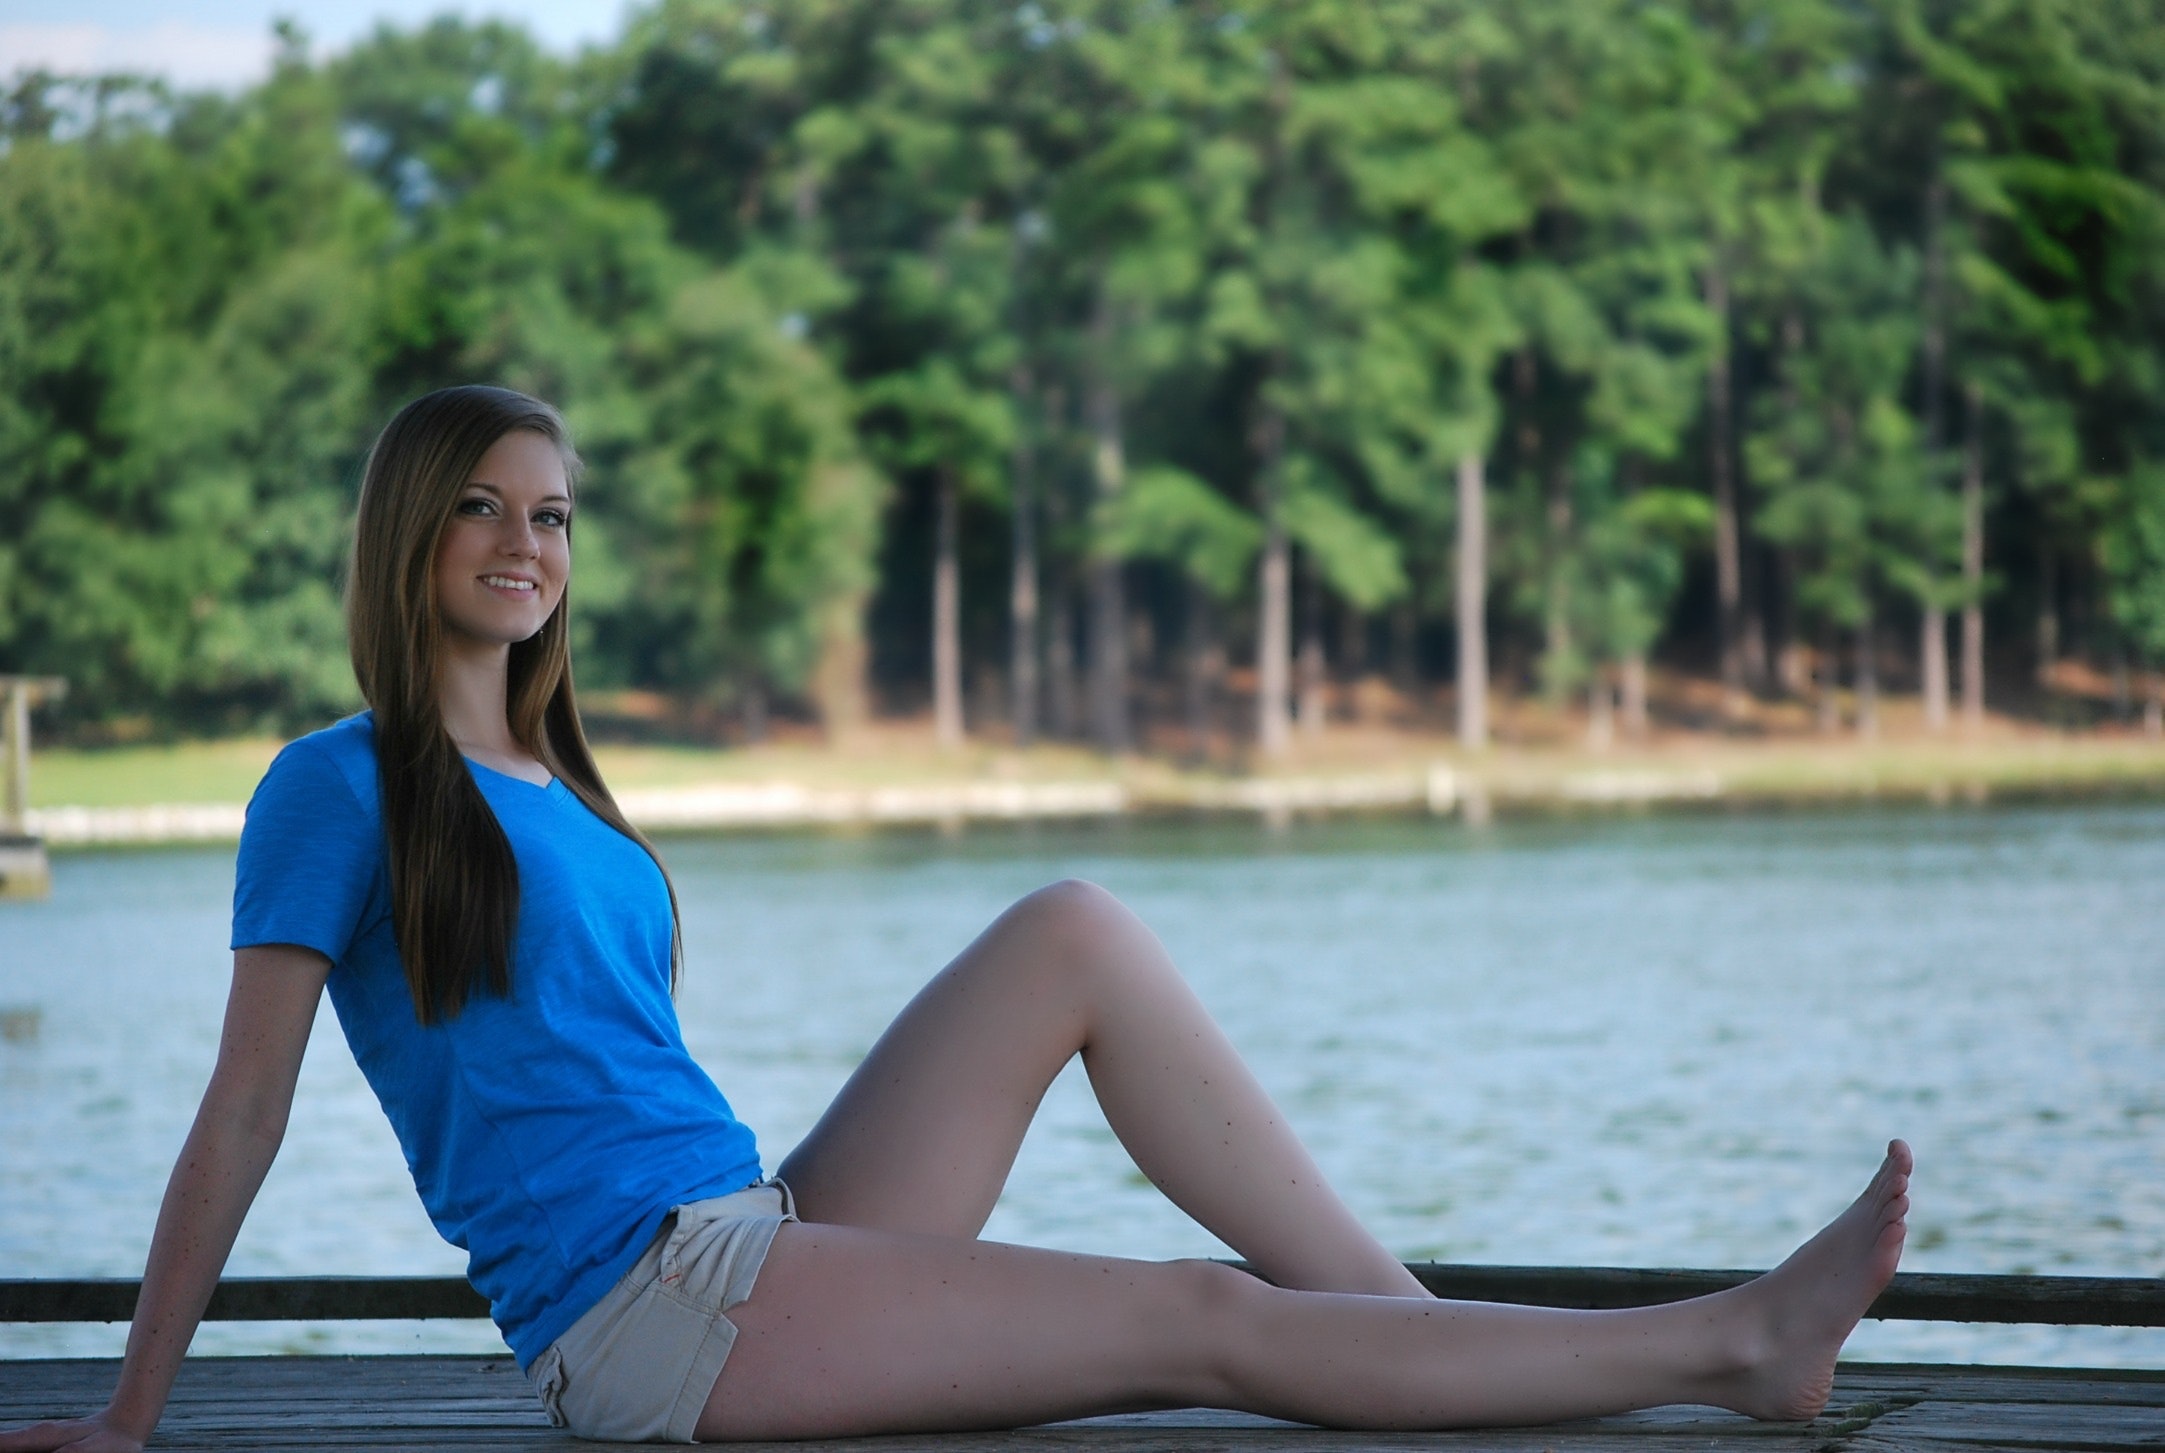 Woman wearing blue t shirt and beige short sitting on brown wooden panel near body of water during daytime photo